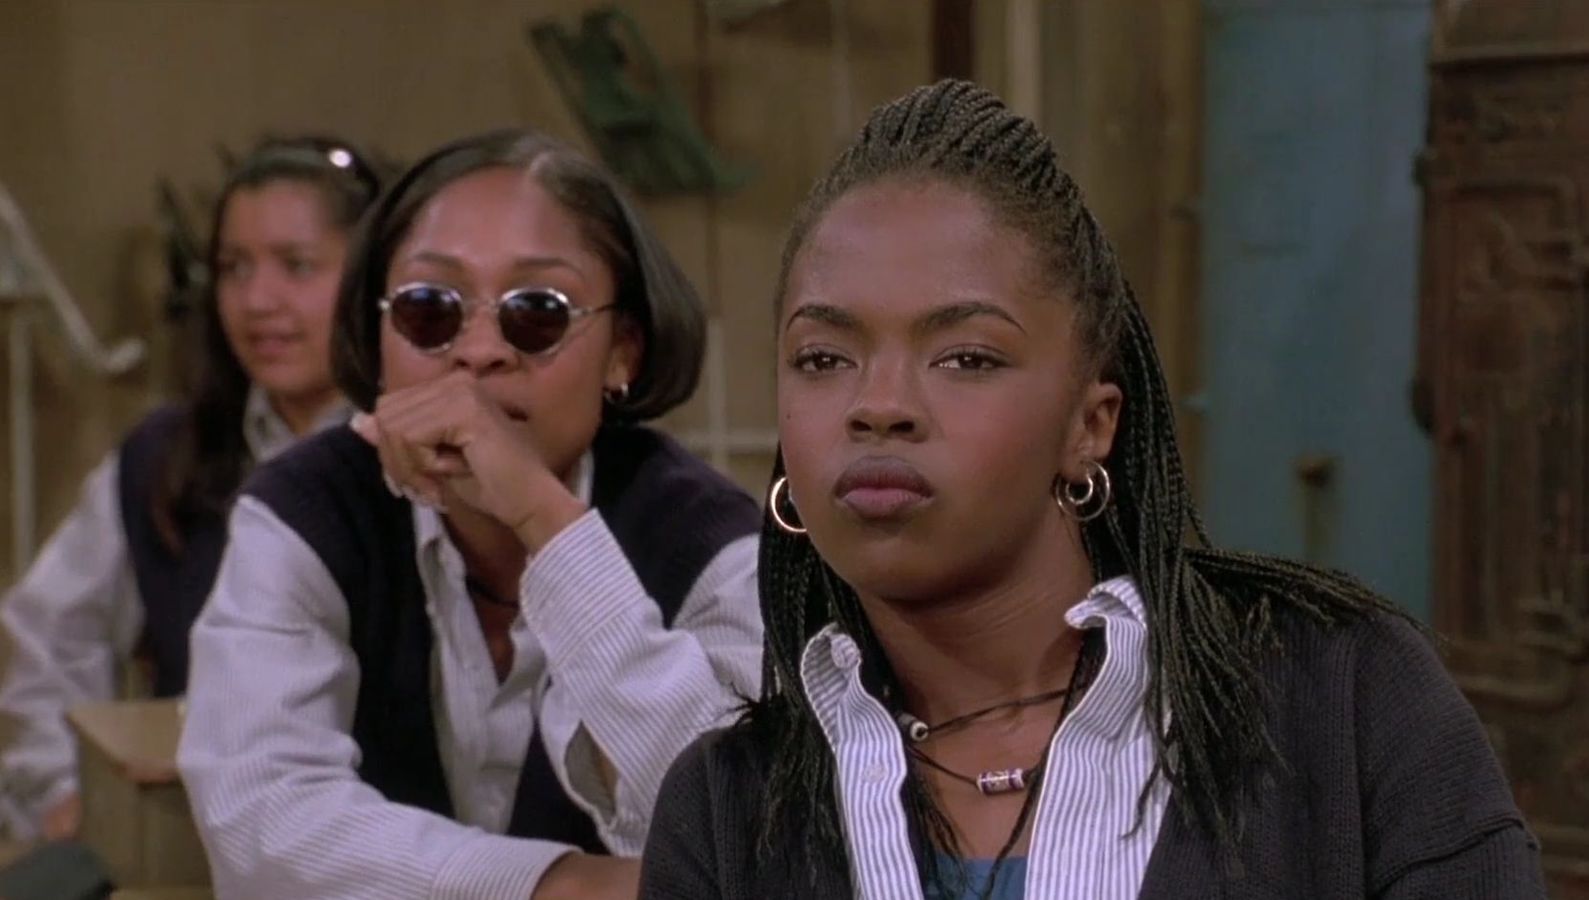 Three young women sitting in a classroom looking towards the camera; the woman in the middle-ground wearing sunglasses, the woman in the foreground staring with attitude